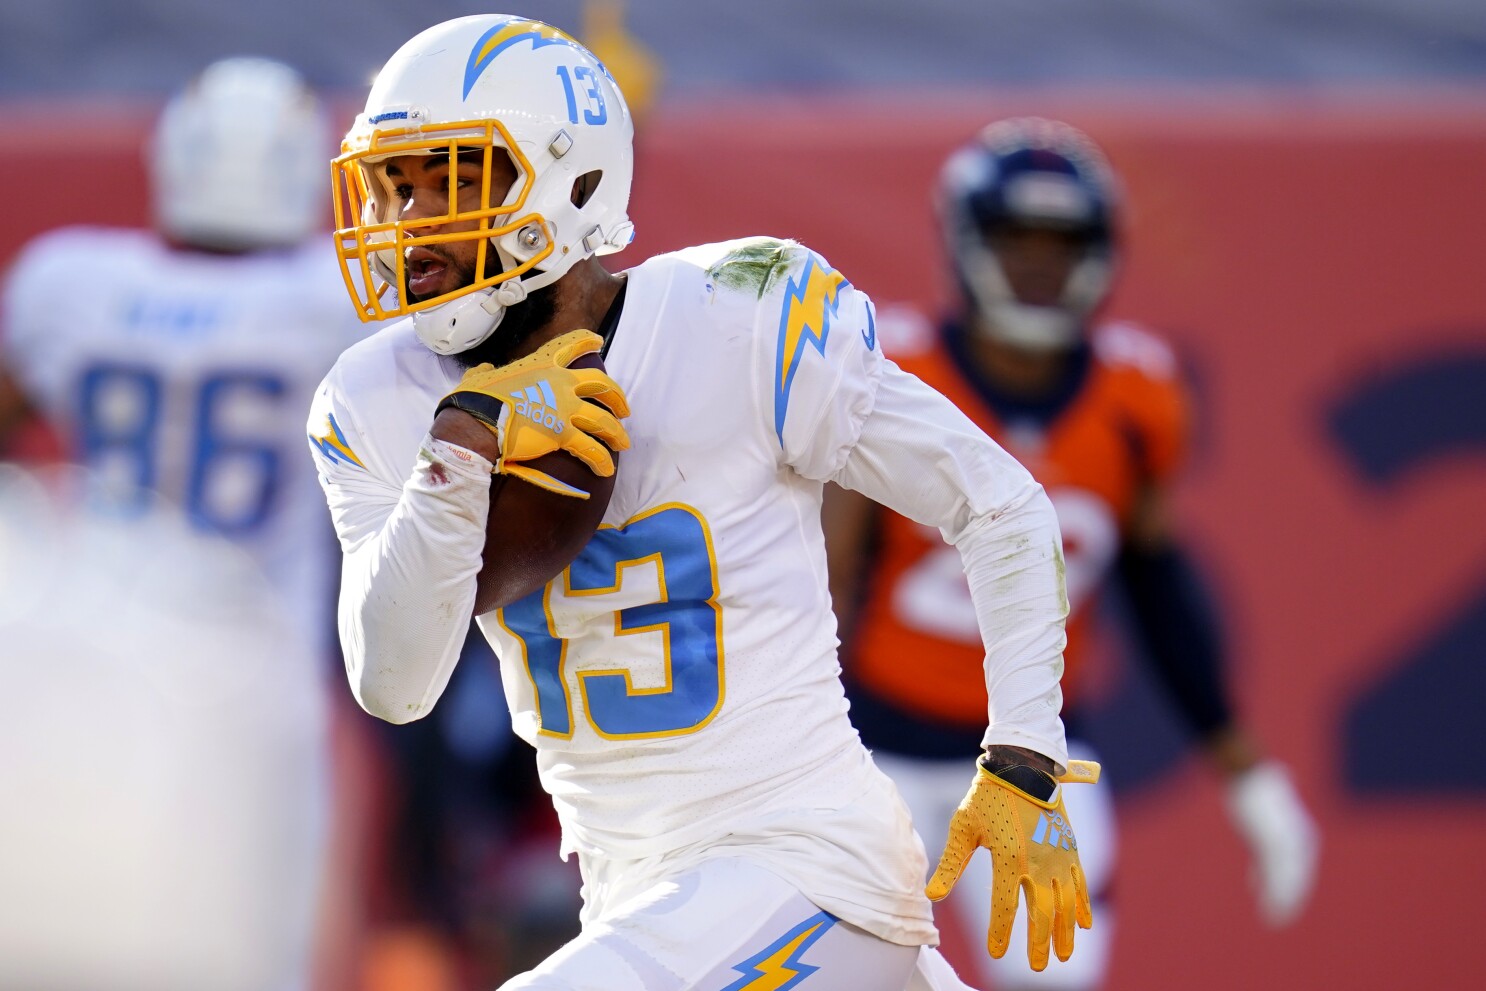 Chargers Wide Receiver Allen Questionable For Raiders Game The San Diego Union Tribune